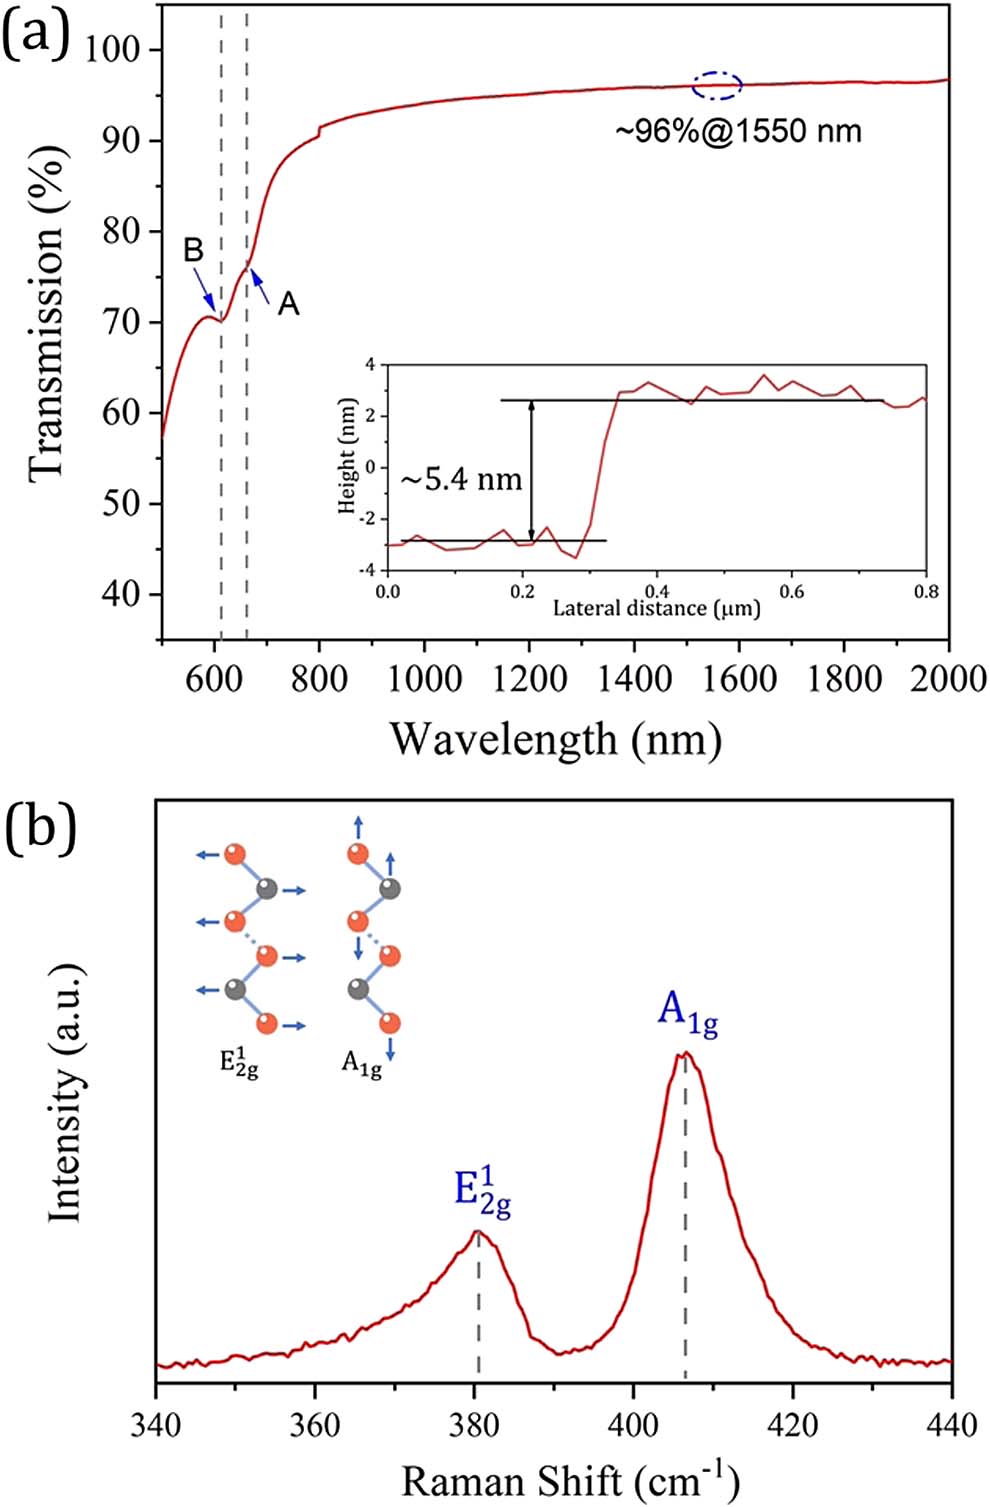 (a) Broadband linear absorption spectrum of few-layer MoS2 film. The inset image is the thickness of film measured by an AFM. (b) Raman spectrum of transferred few-layer MoS2, corresponding to the typical Raman vibrational modes.